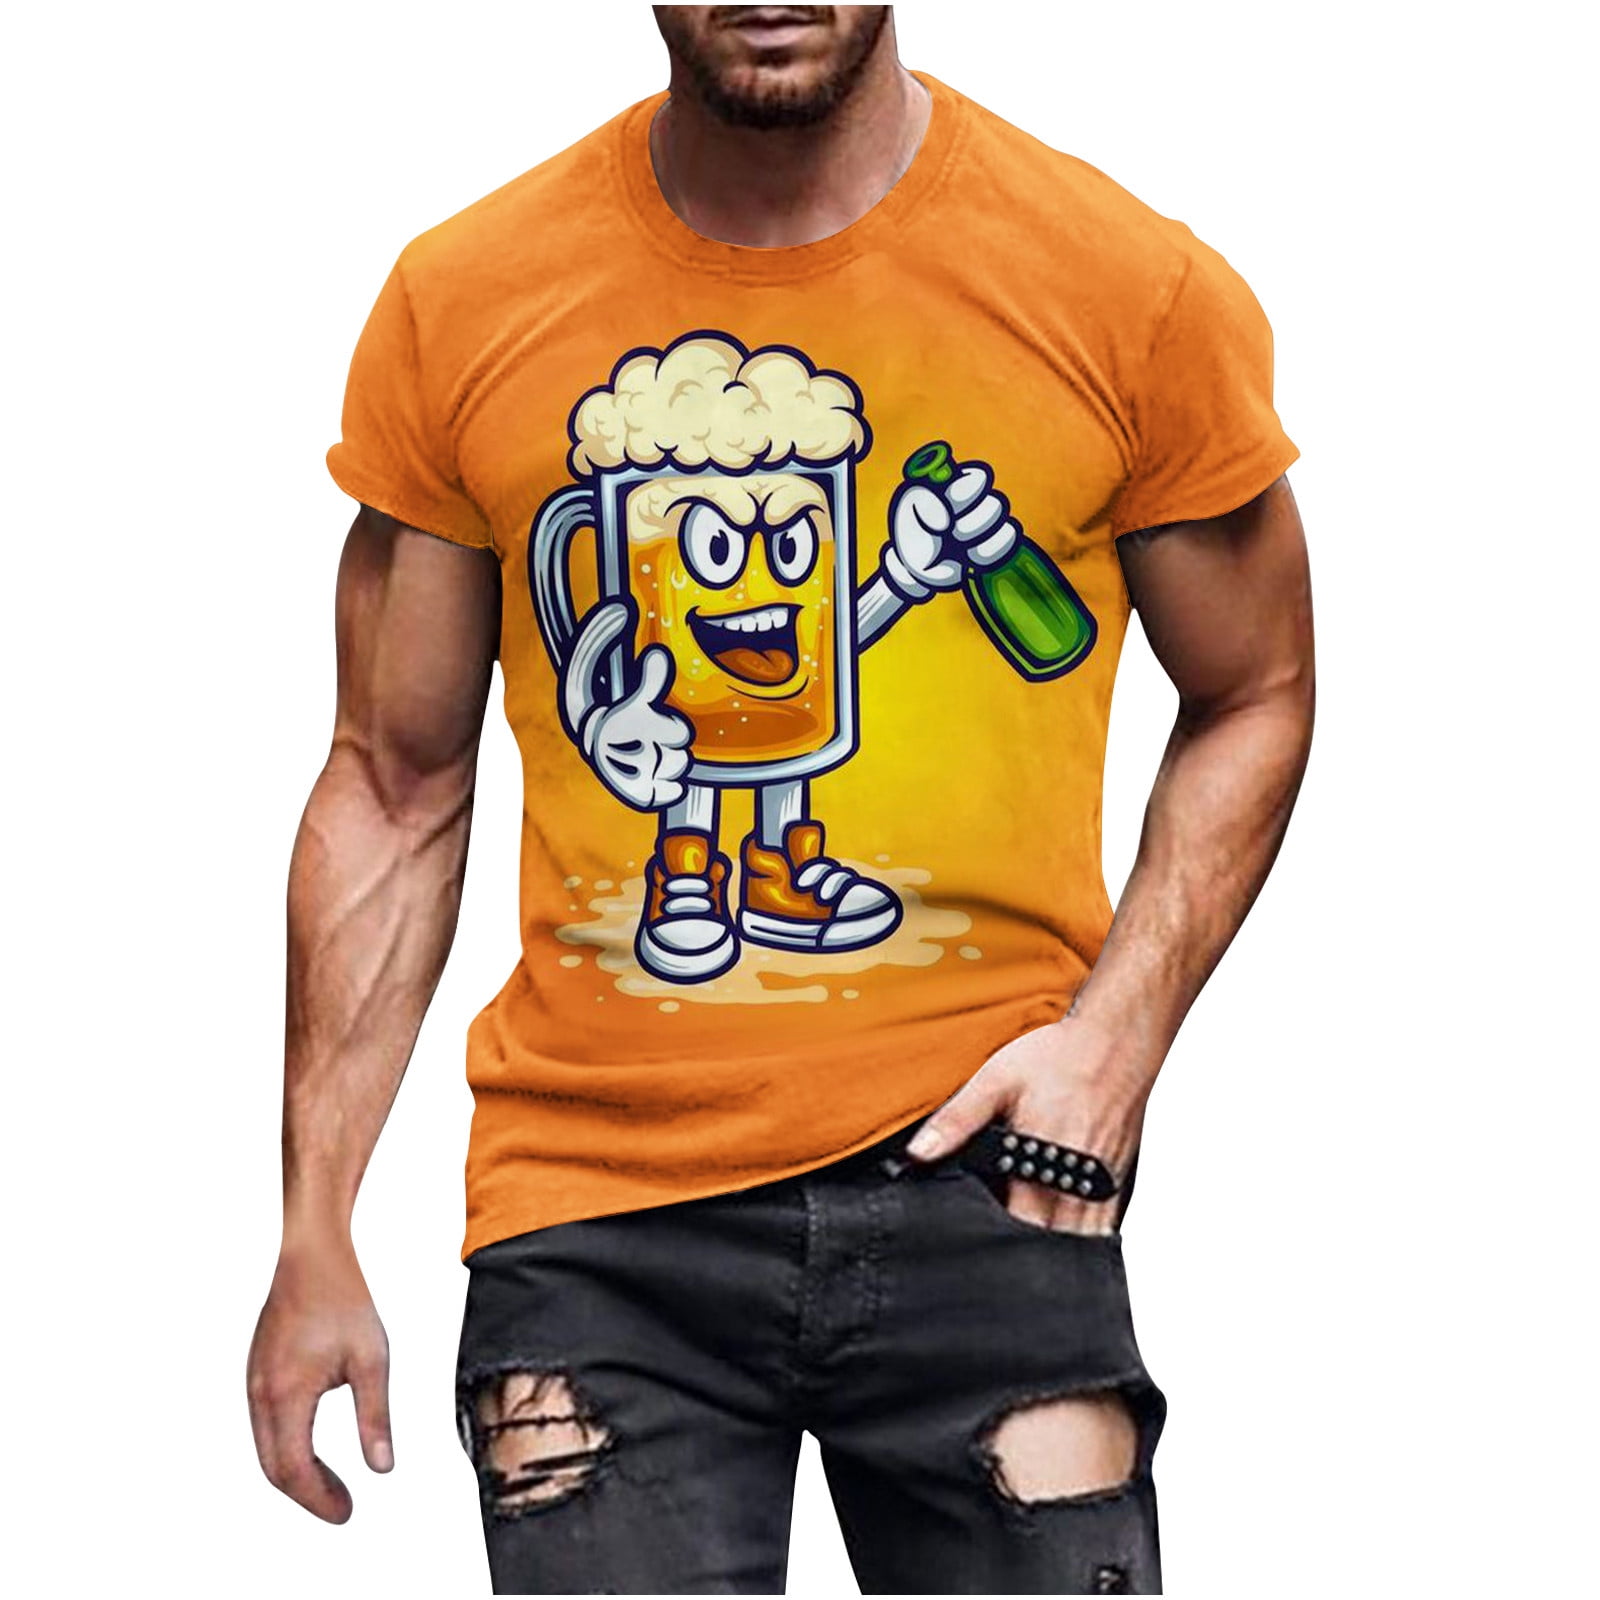 VSSSJ Mens New Fashion Casual Round Neck Pullover Tees Relaxed Fit 3D Beer  Digital Print Short Sleeve Shirts Leisure Athletic Workout T-Shirt Yellow  XXXXXL 